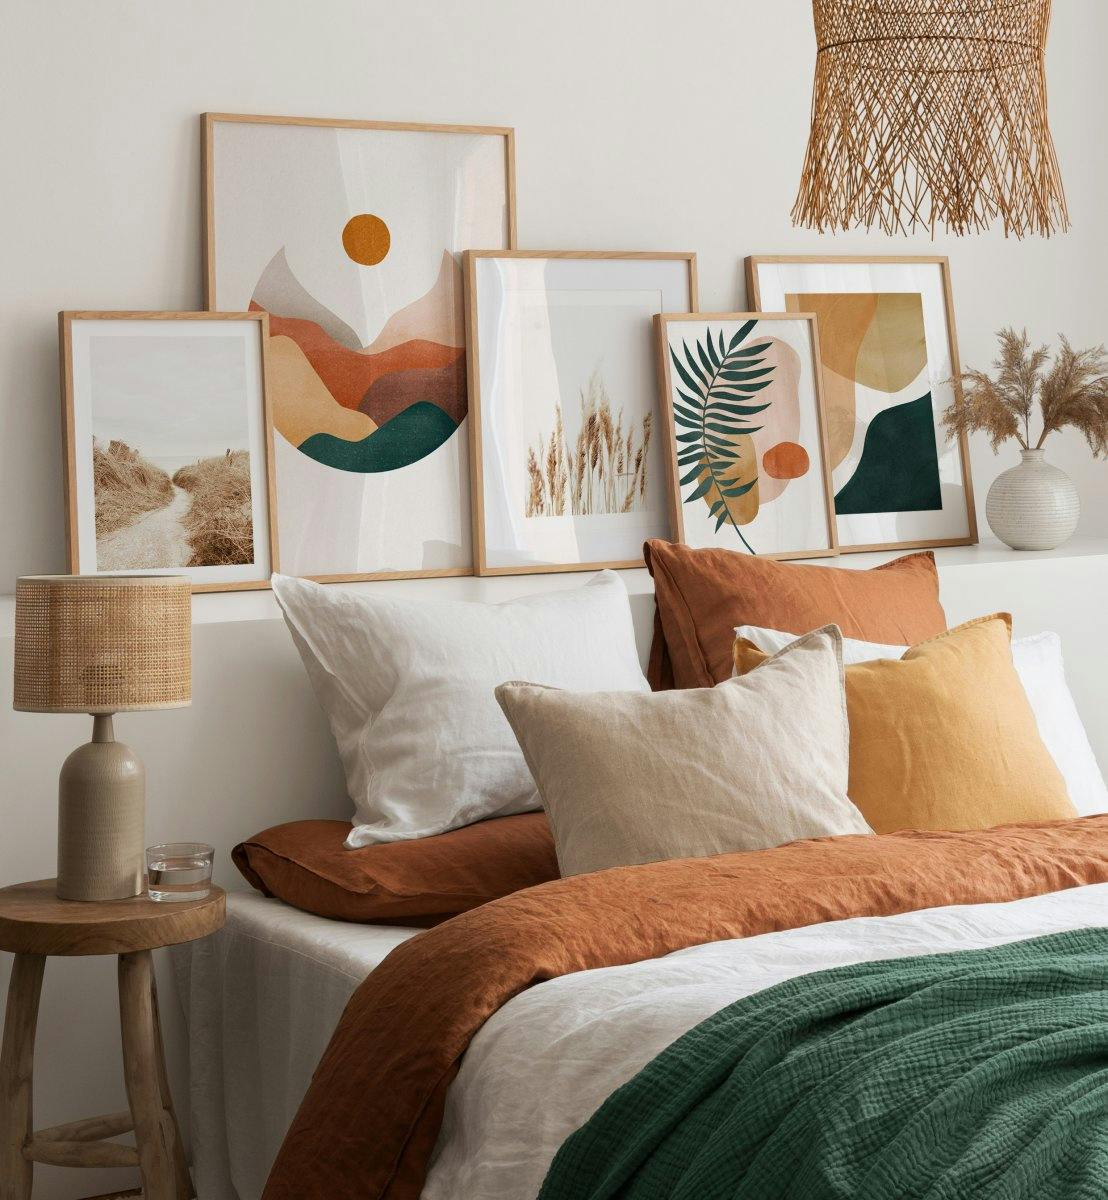 Graphic art prints, illustrations, and photographs in earthy tones for a bedroom